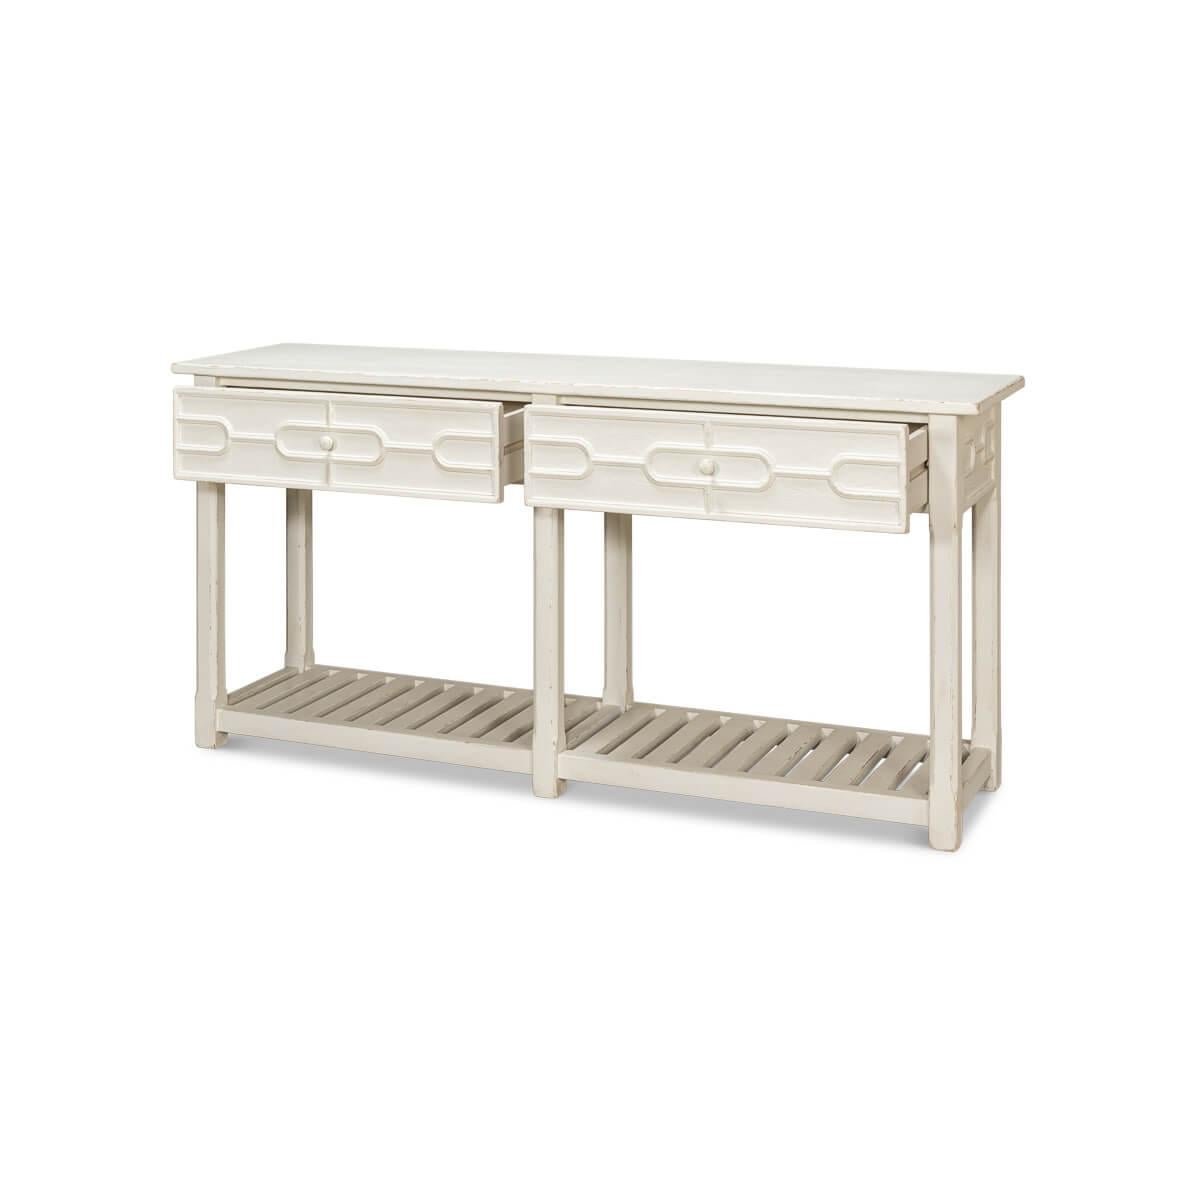 Rustic Hampton Beach White Painted Console Table For Sale